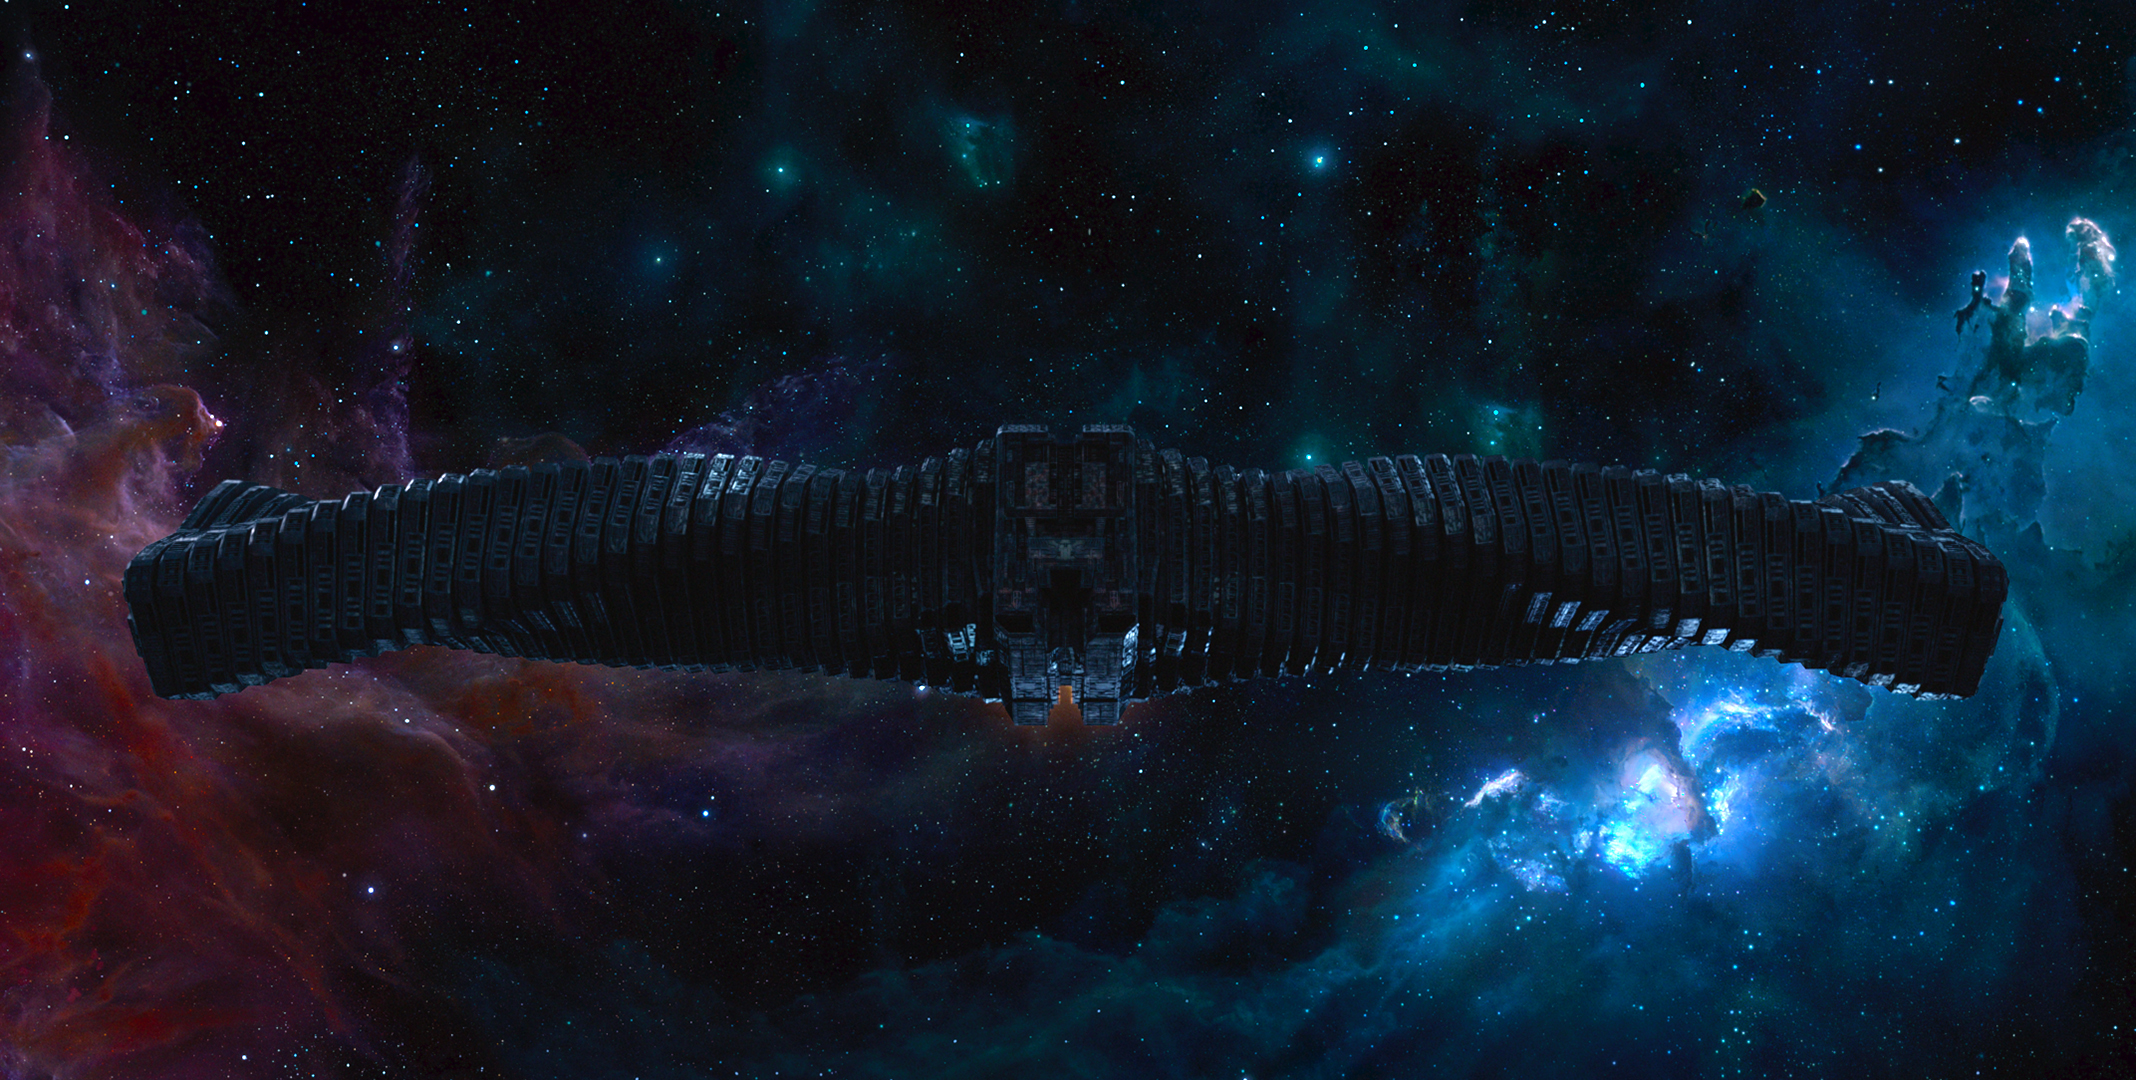 Ronan S Ship The Dark Aster From Guardians Of The Galaxy Desktop